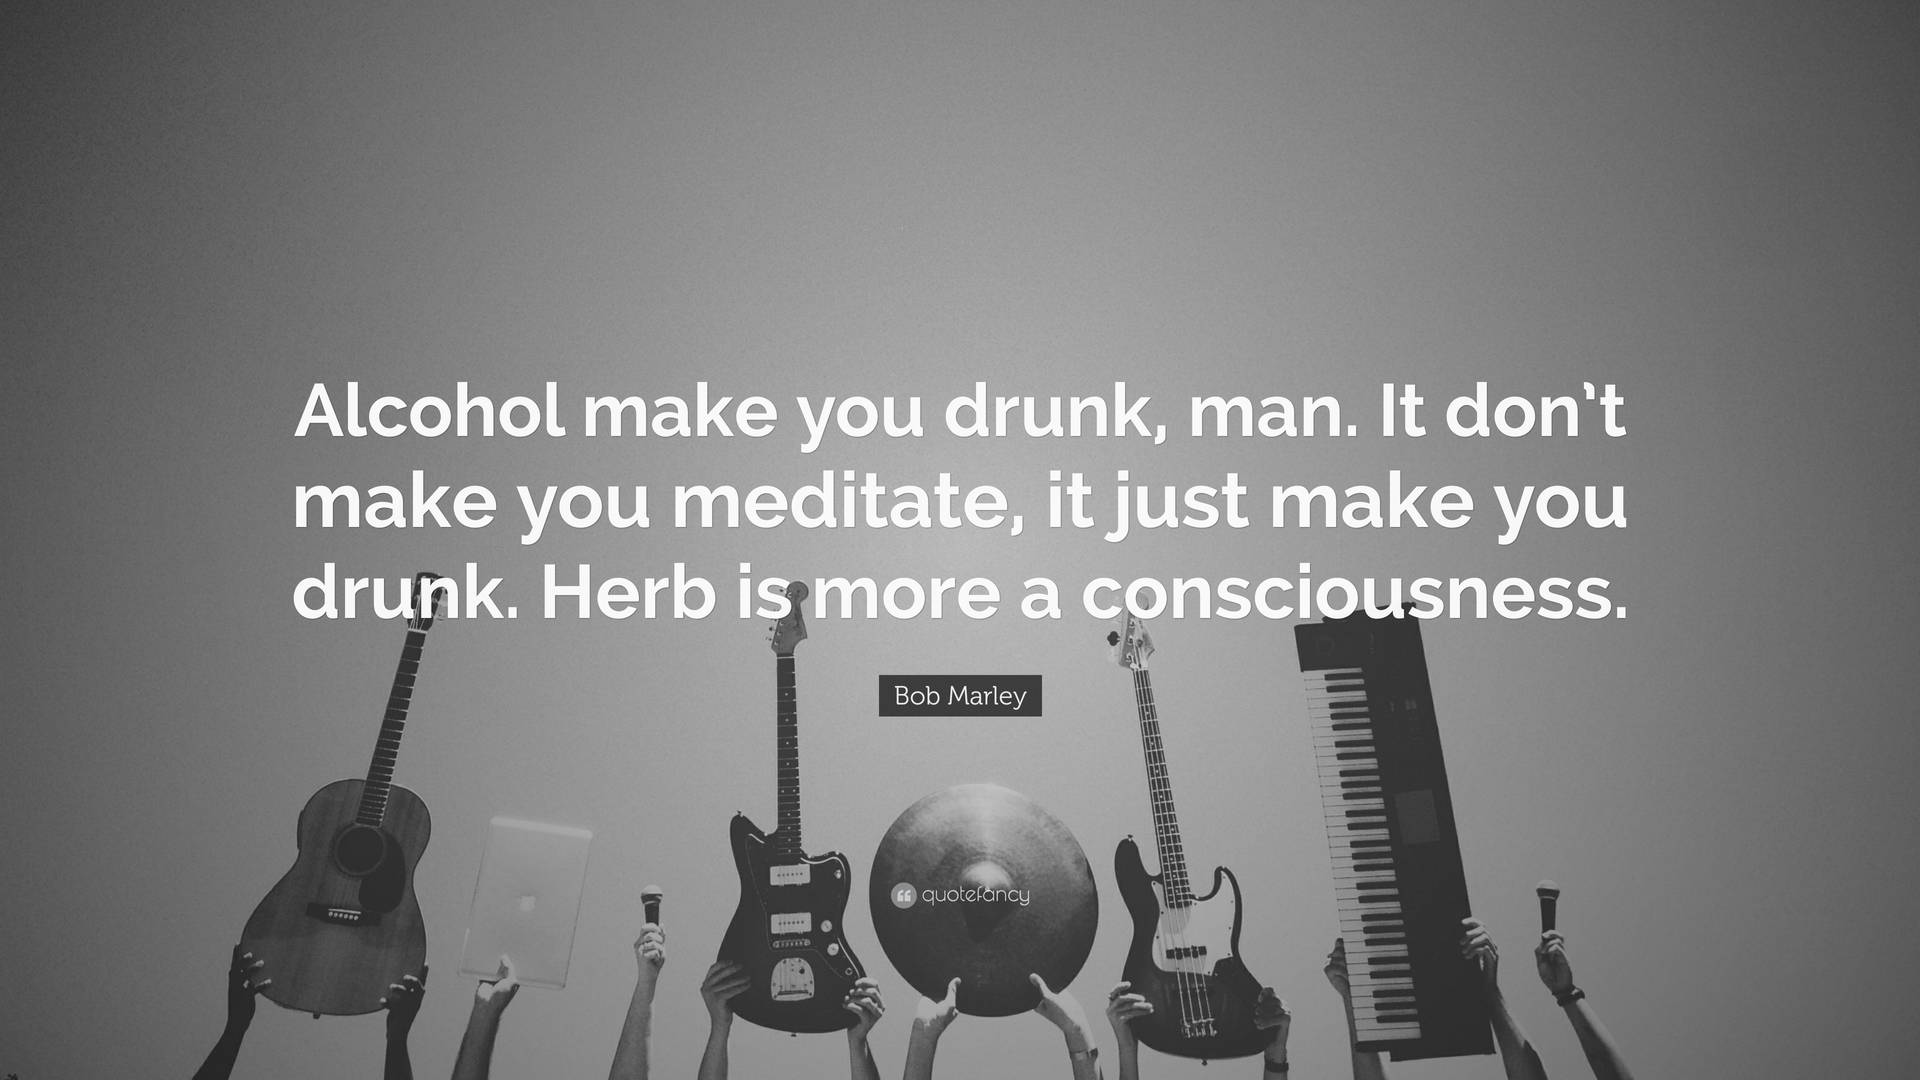 Bob Marley Quotes Monochrome Background